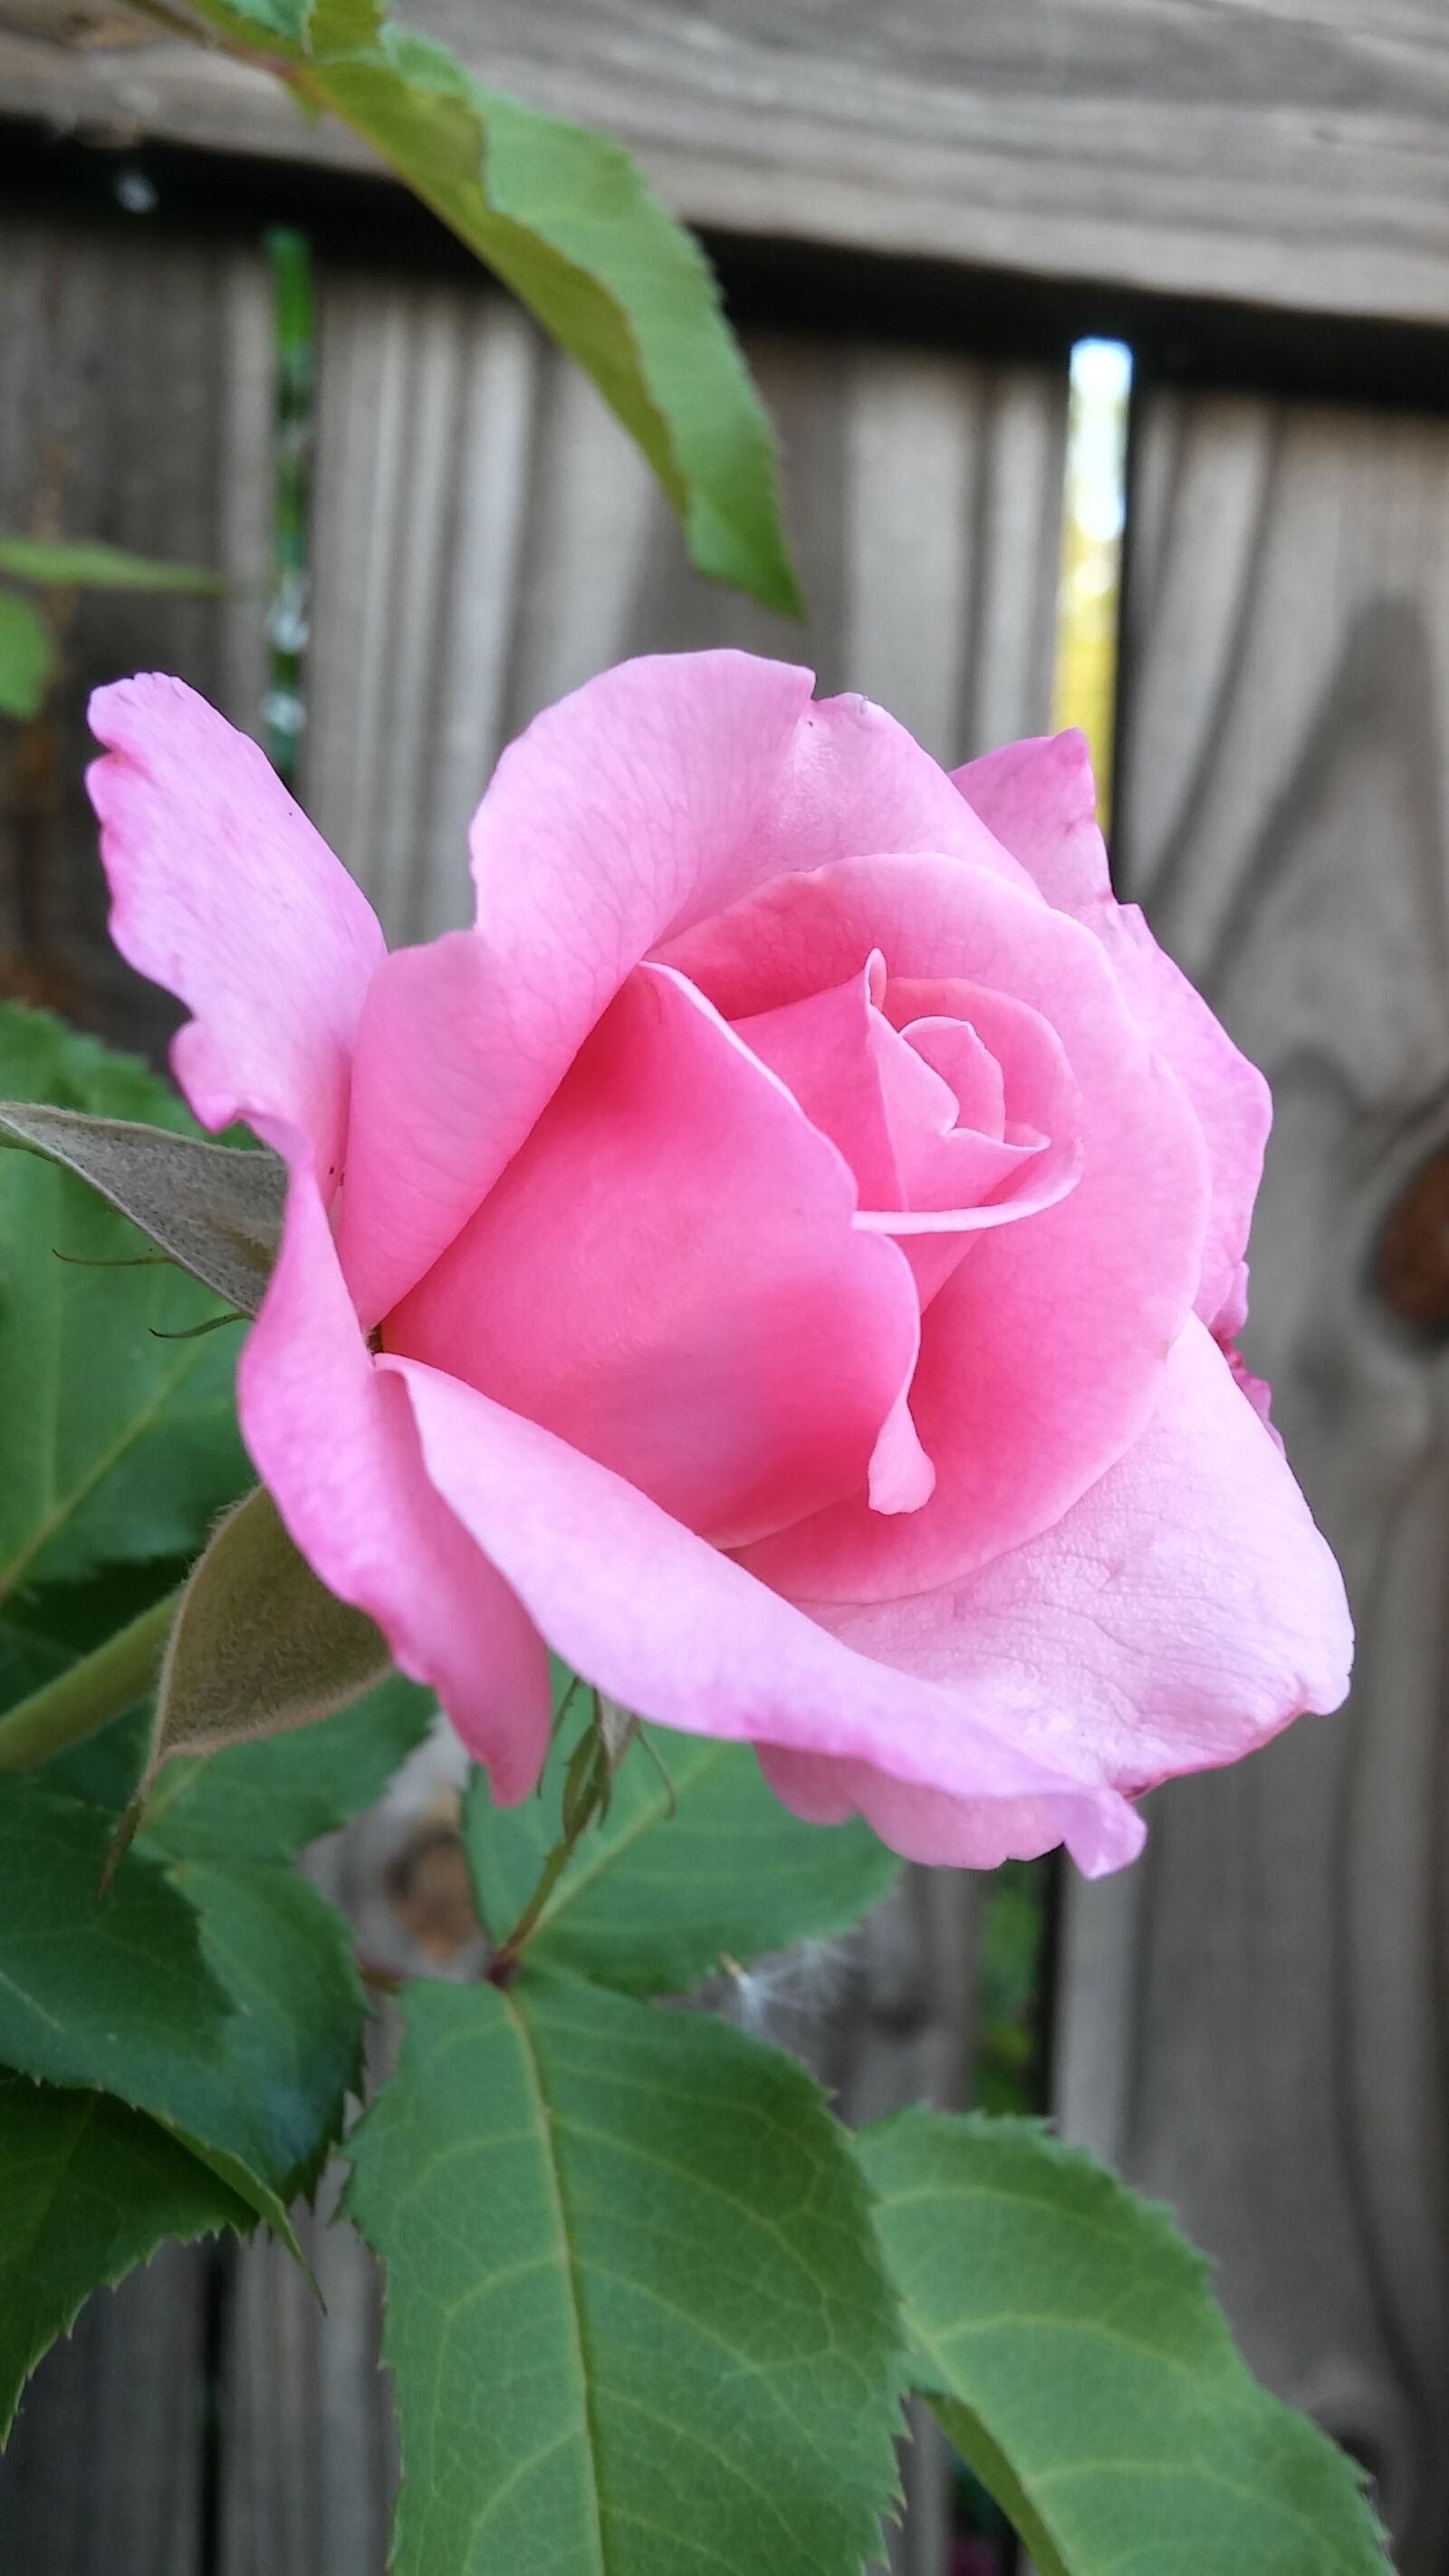 LG G STYLO sample photo. Flower, pink rose, blurry photography